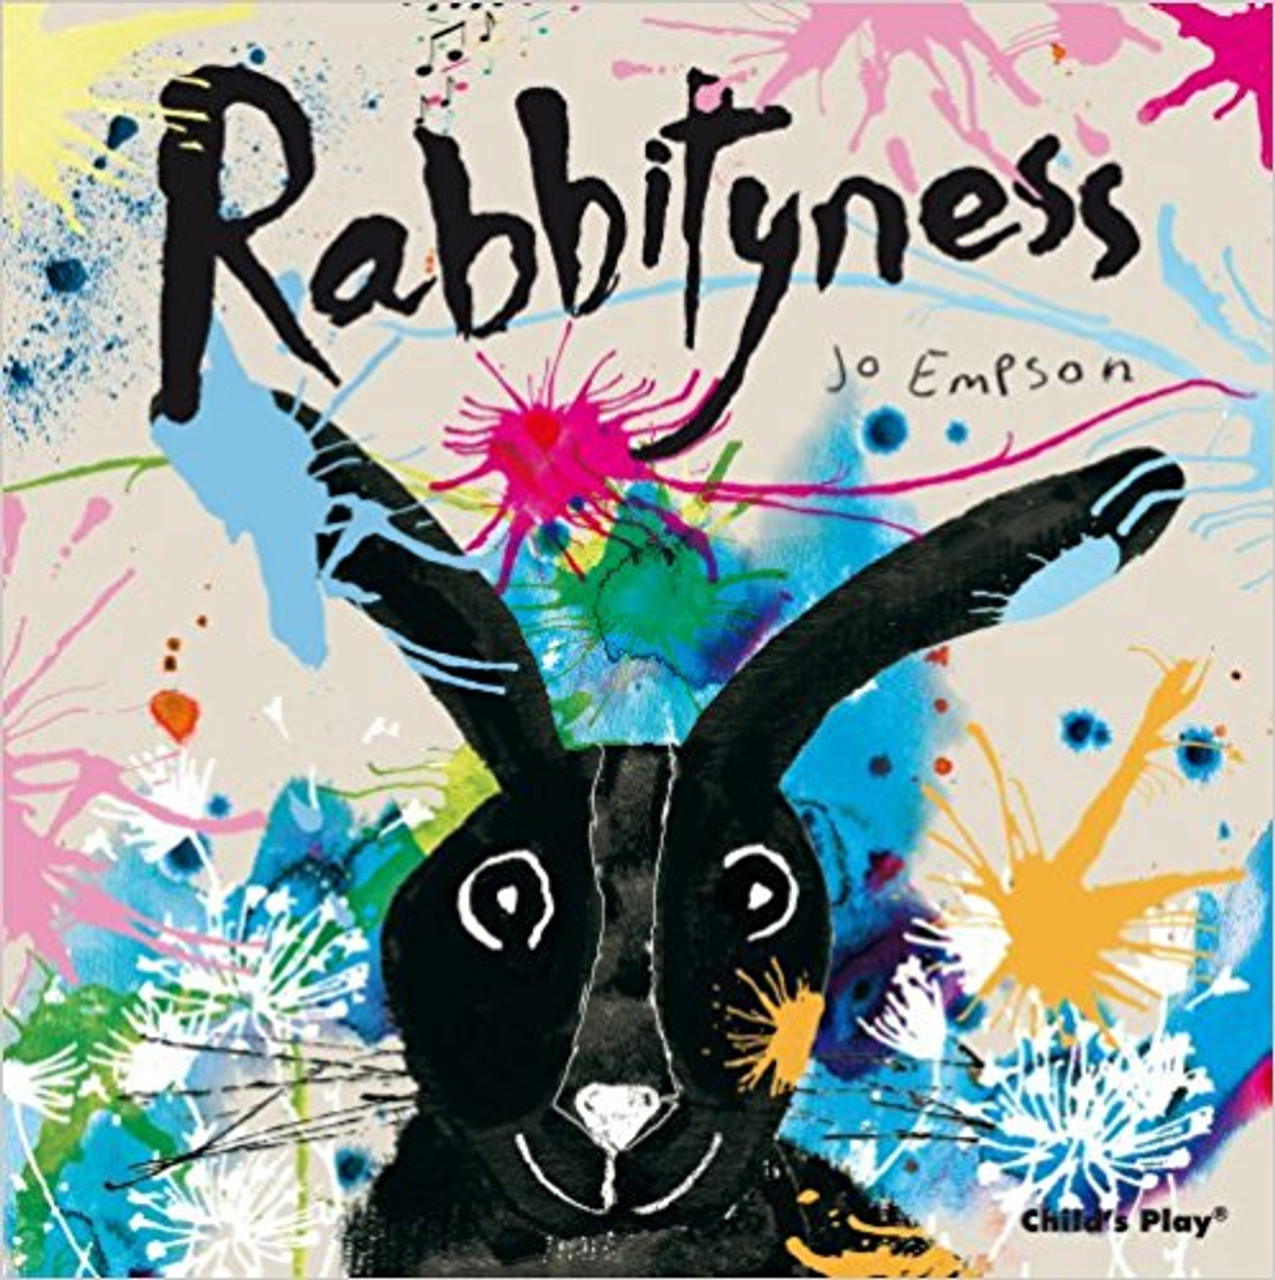 Rabbit enjoys doing rabbity things, but he also loves un-rabbity things! When Rabbit suddenly disappears, no one knows where he has gone. His friends are desolate. But, as it turns out, Rabbit has left behind some very special gifts for them, to help them discover their own unrabbity talents! This is a stunning debut picture book by author/illustrator Jo Empson. Rabbityness celebrates individuality, encourages the creativity in everyone and positively introduces children to dealing with loss of any kind.